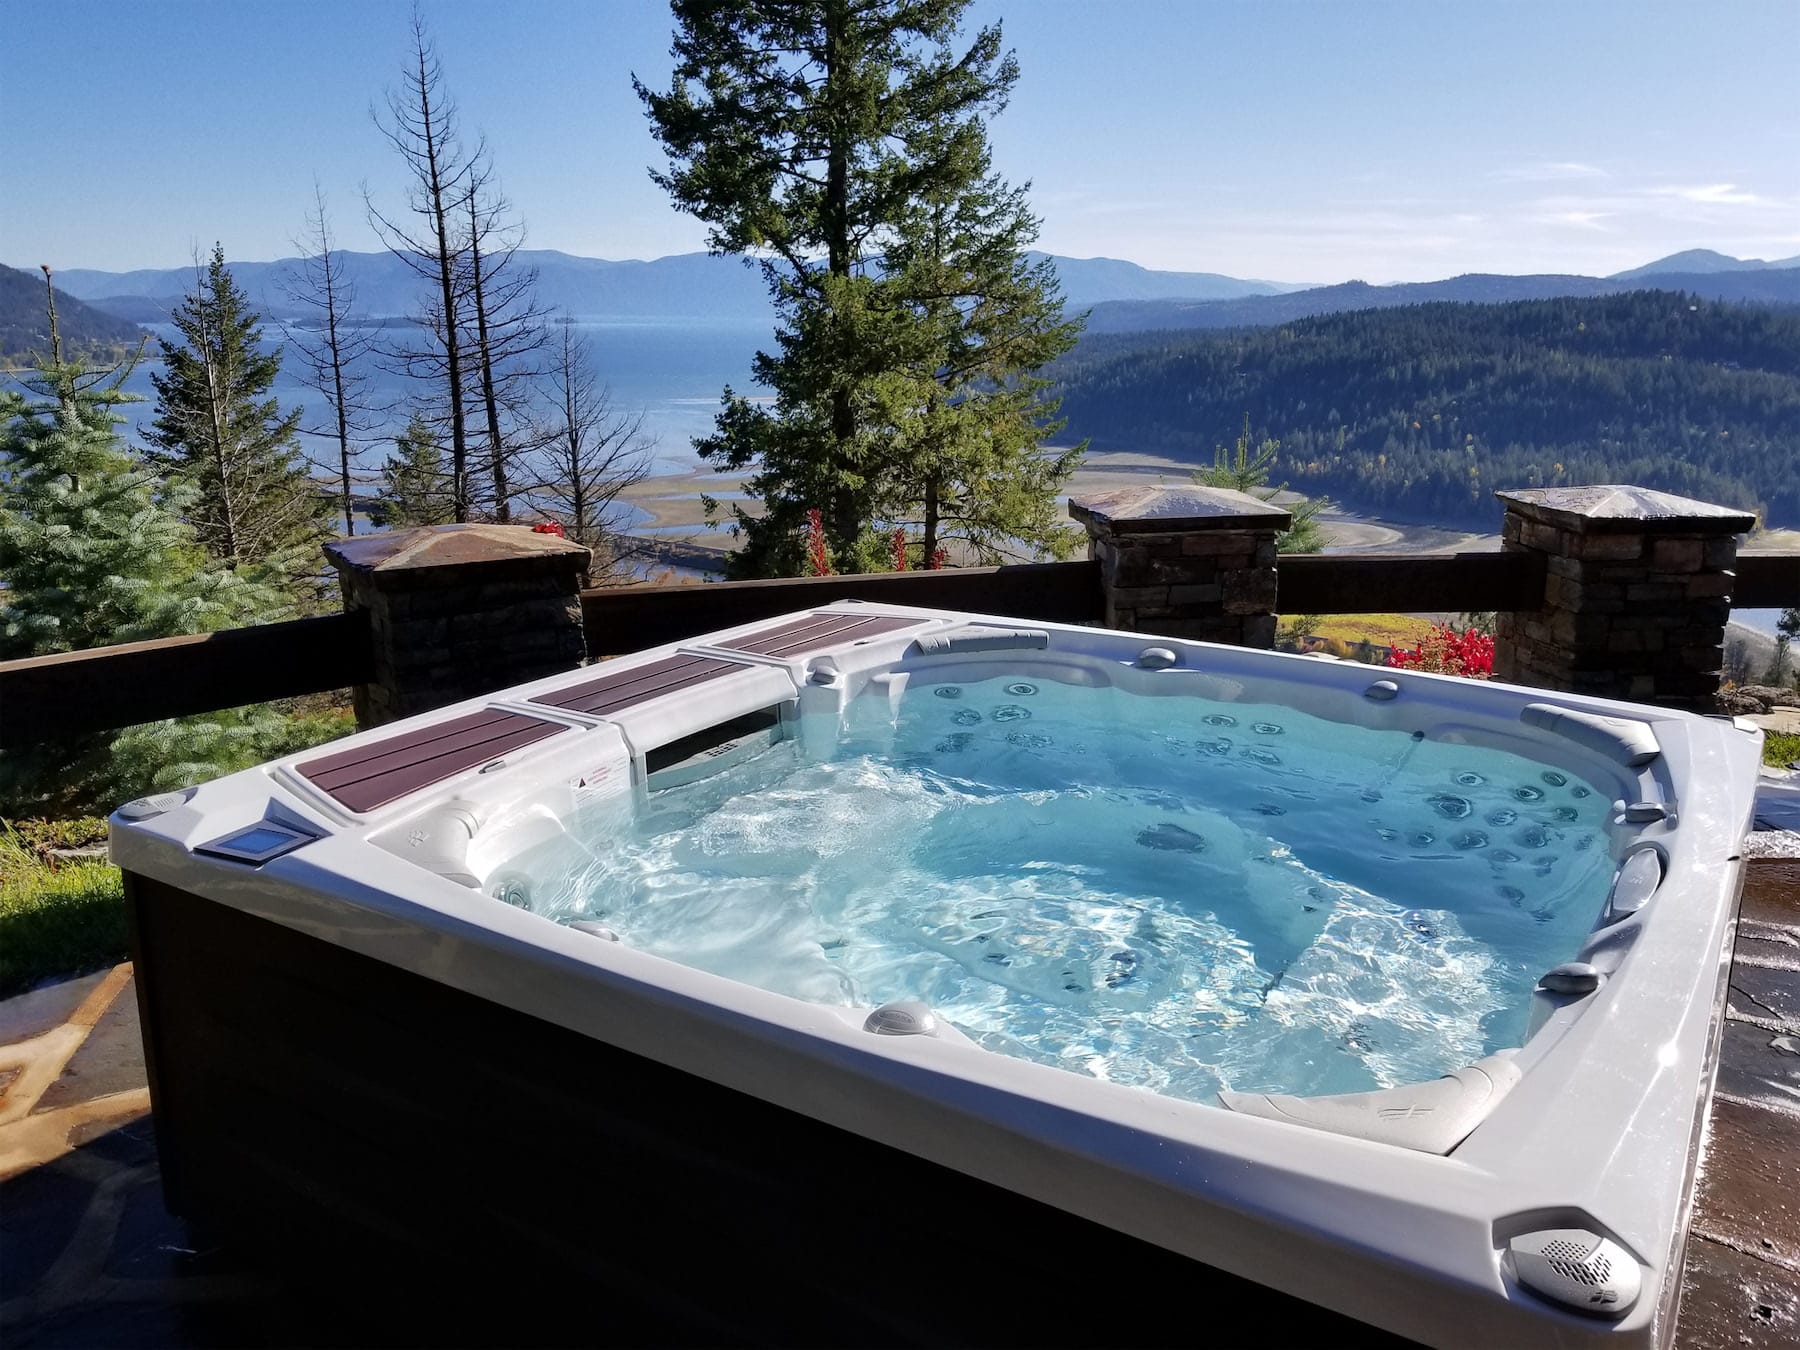 Top 3 Hot Tub Features That Every Spa Should HaveImage